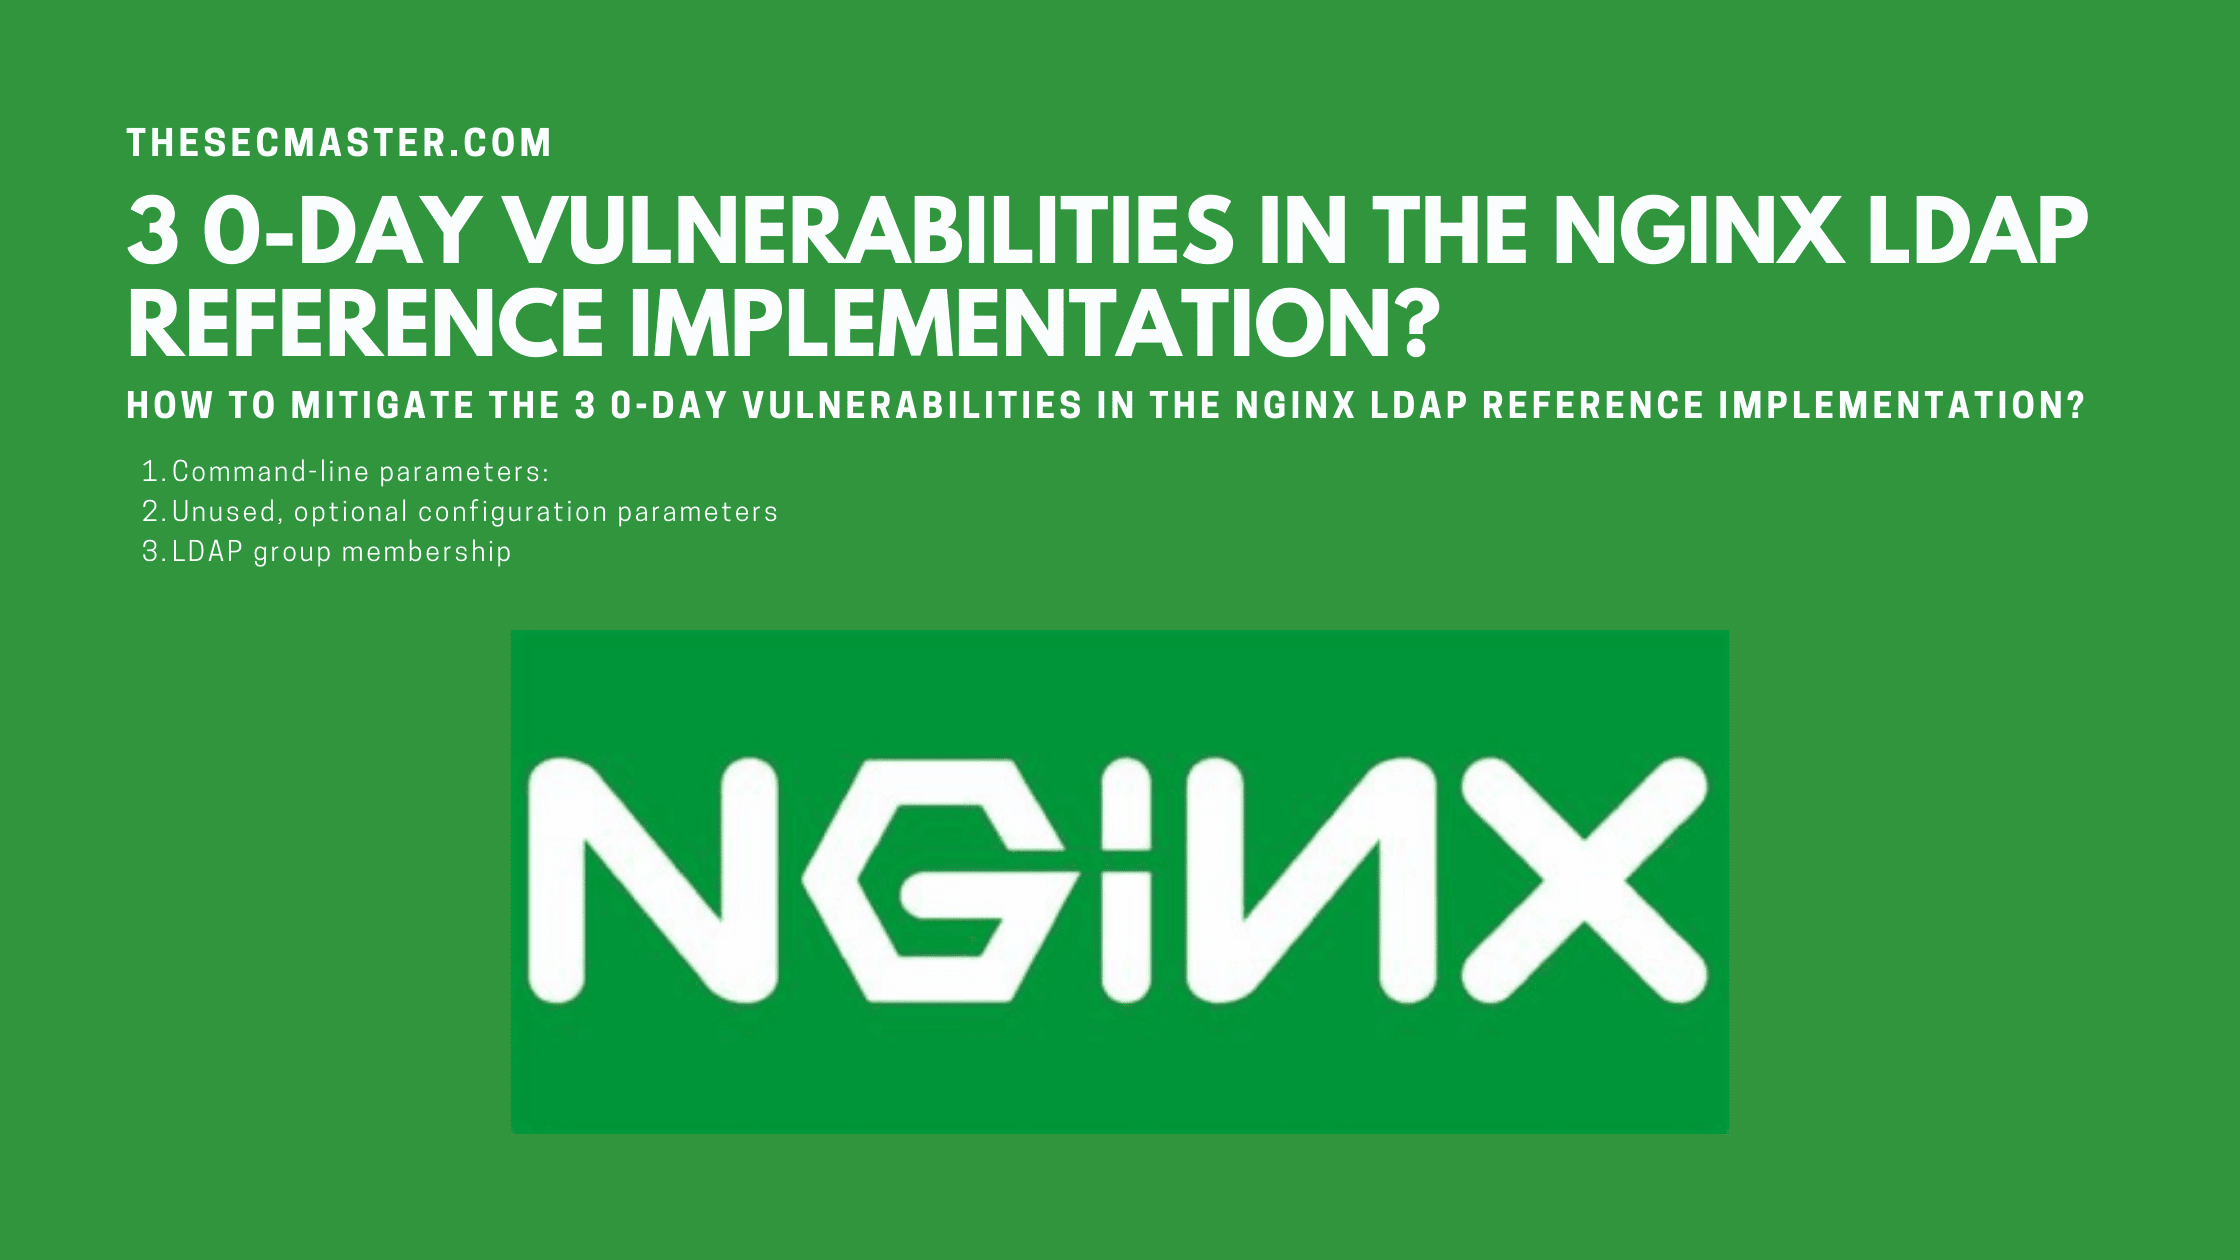 How To Mitigate The 3 0 Day Vulnerabilities In The Nginx Ldap Reference Implementation